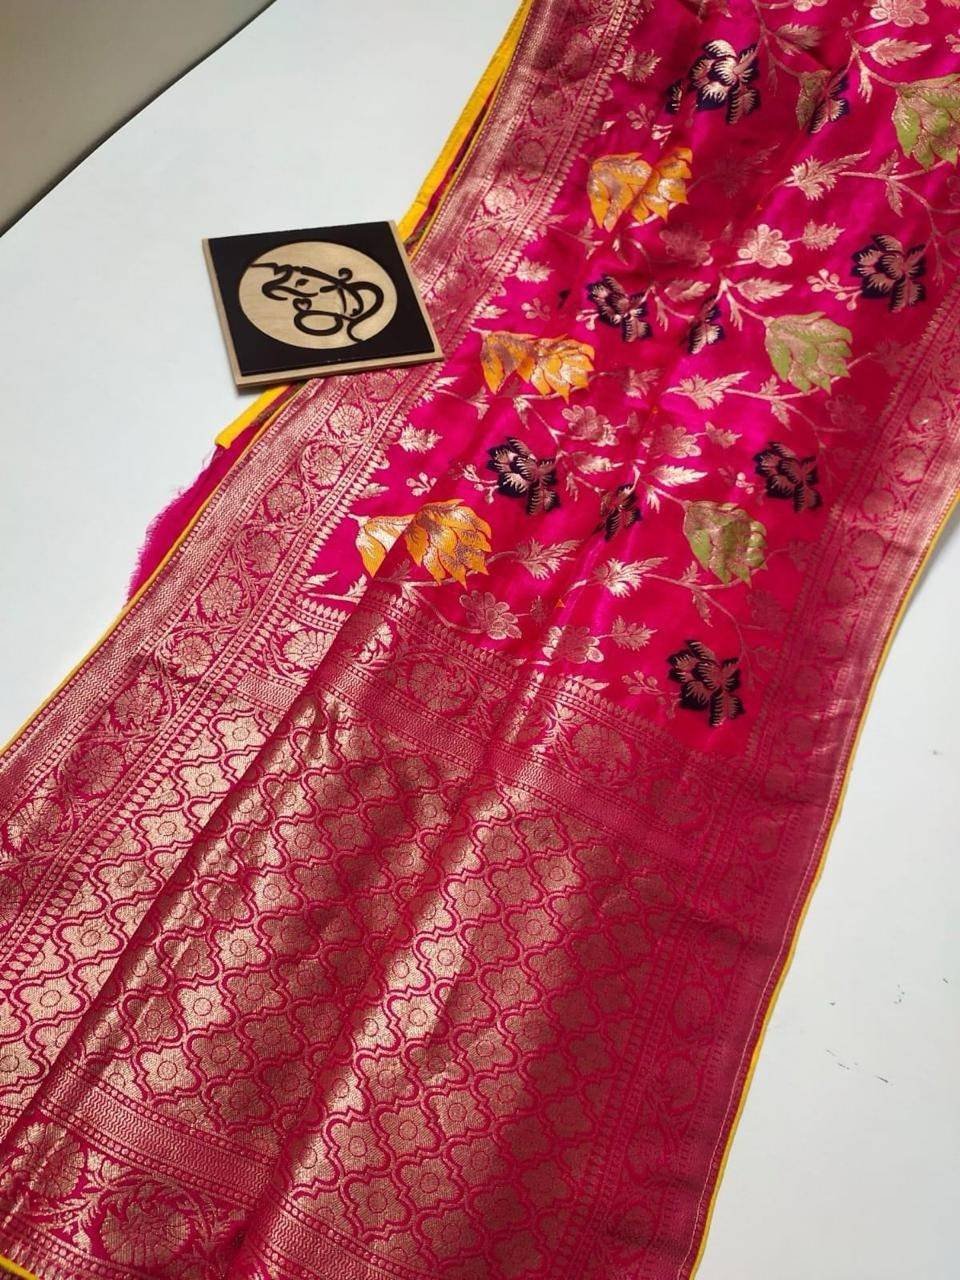 Primary image for Banarasi Zari Weaving Saree in Dola Silk, contrast piping with stunning blouse, 